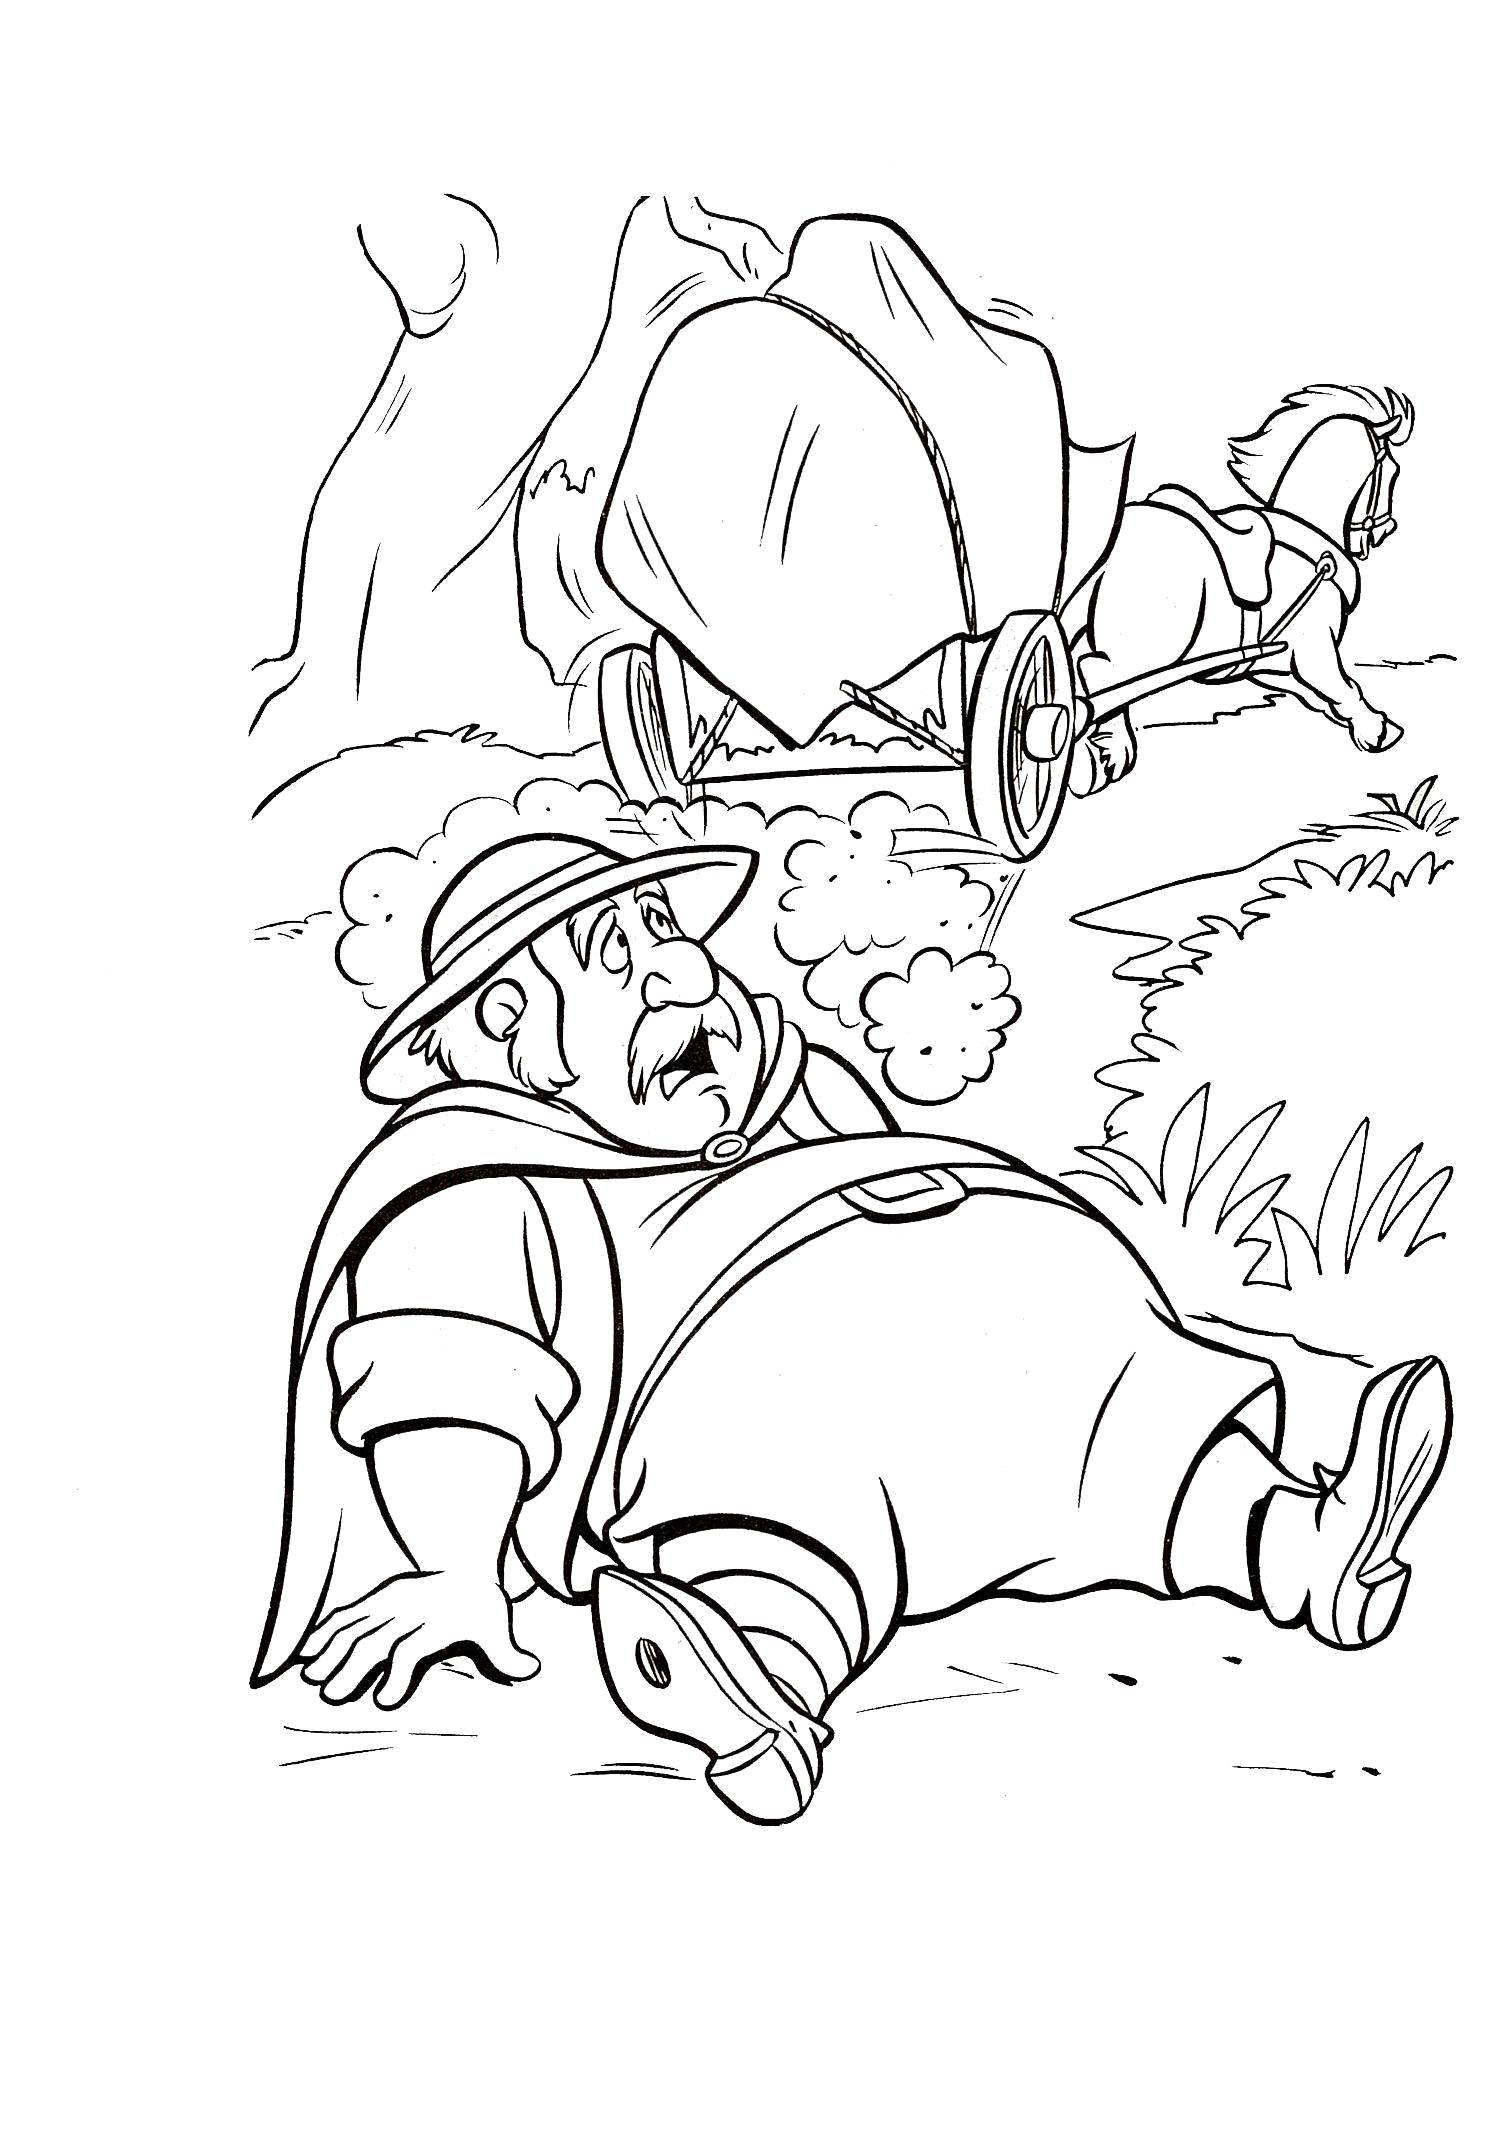 Coloring Cartoon character. Category Disney coloring pages. Tags:  Disney, cartoon.